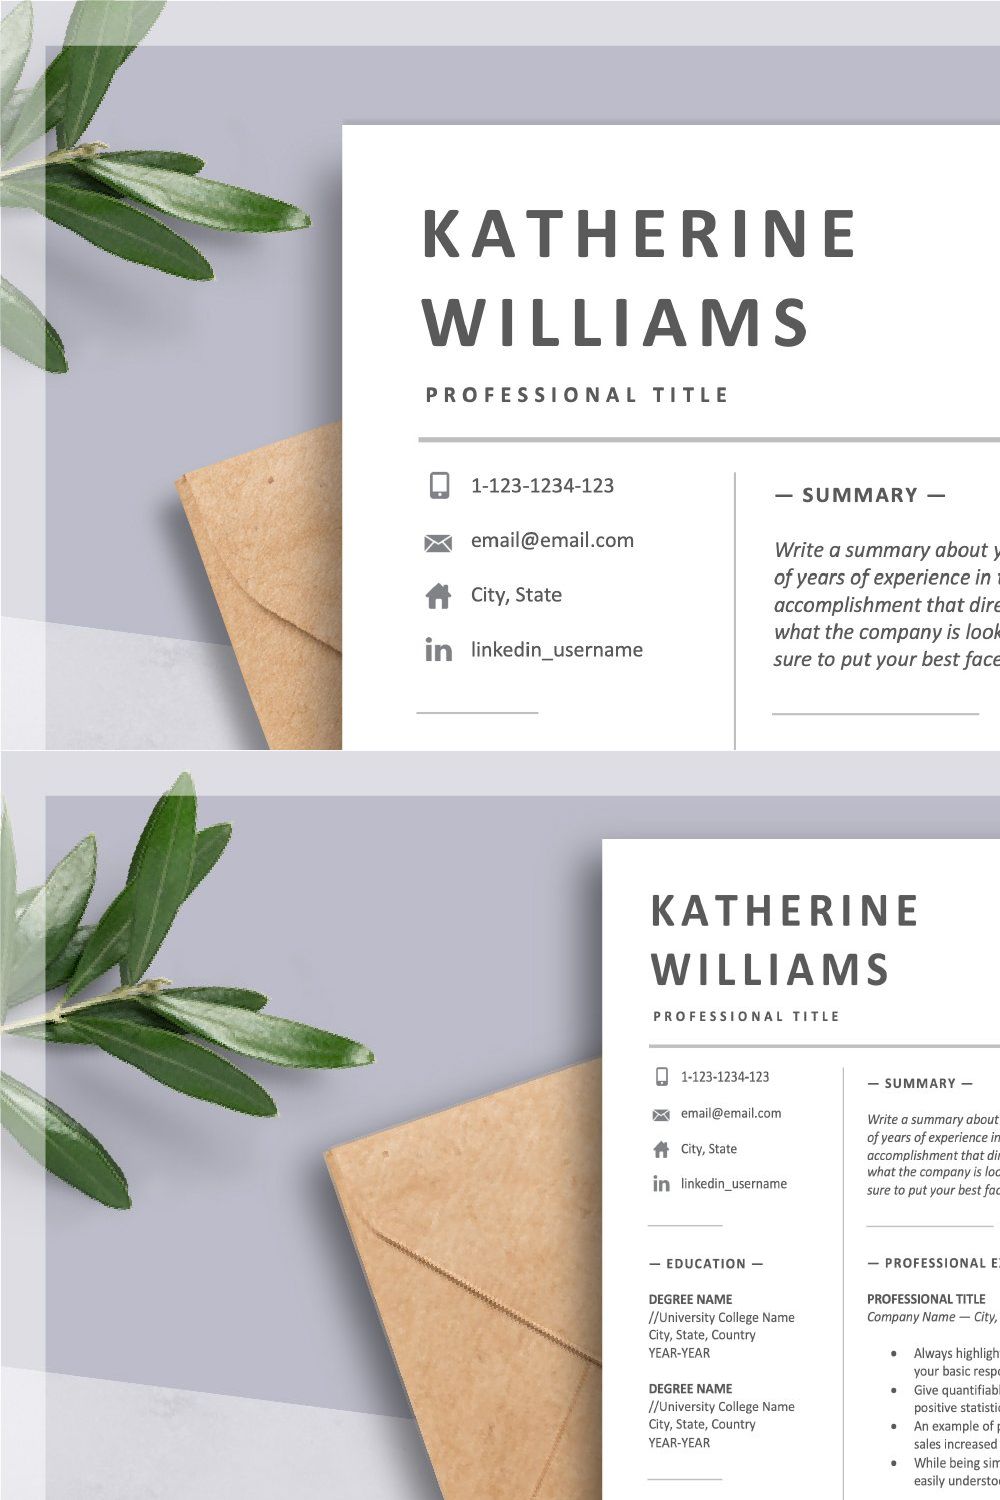 Resume Design + Photo Picture Insert pinterest preview image.